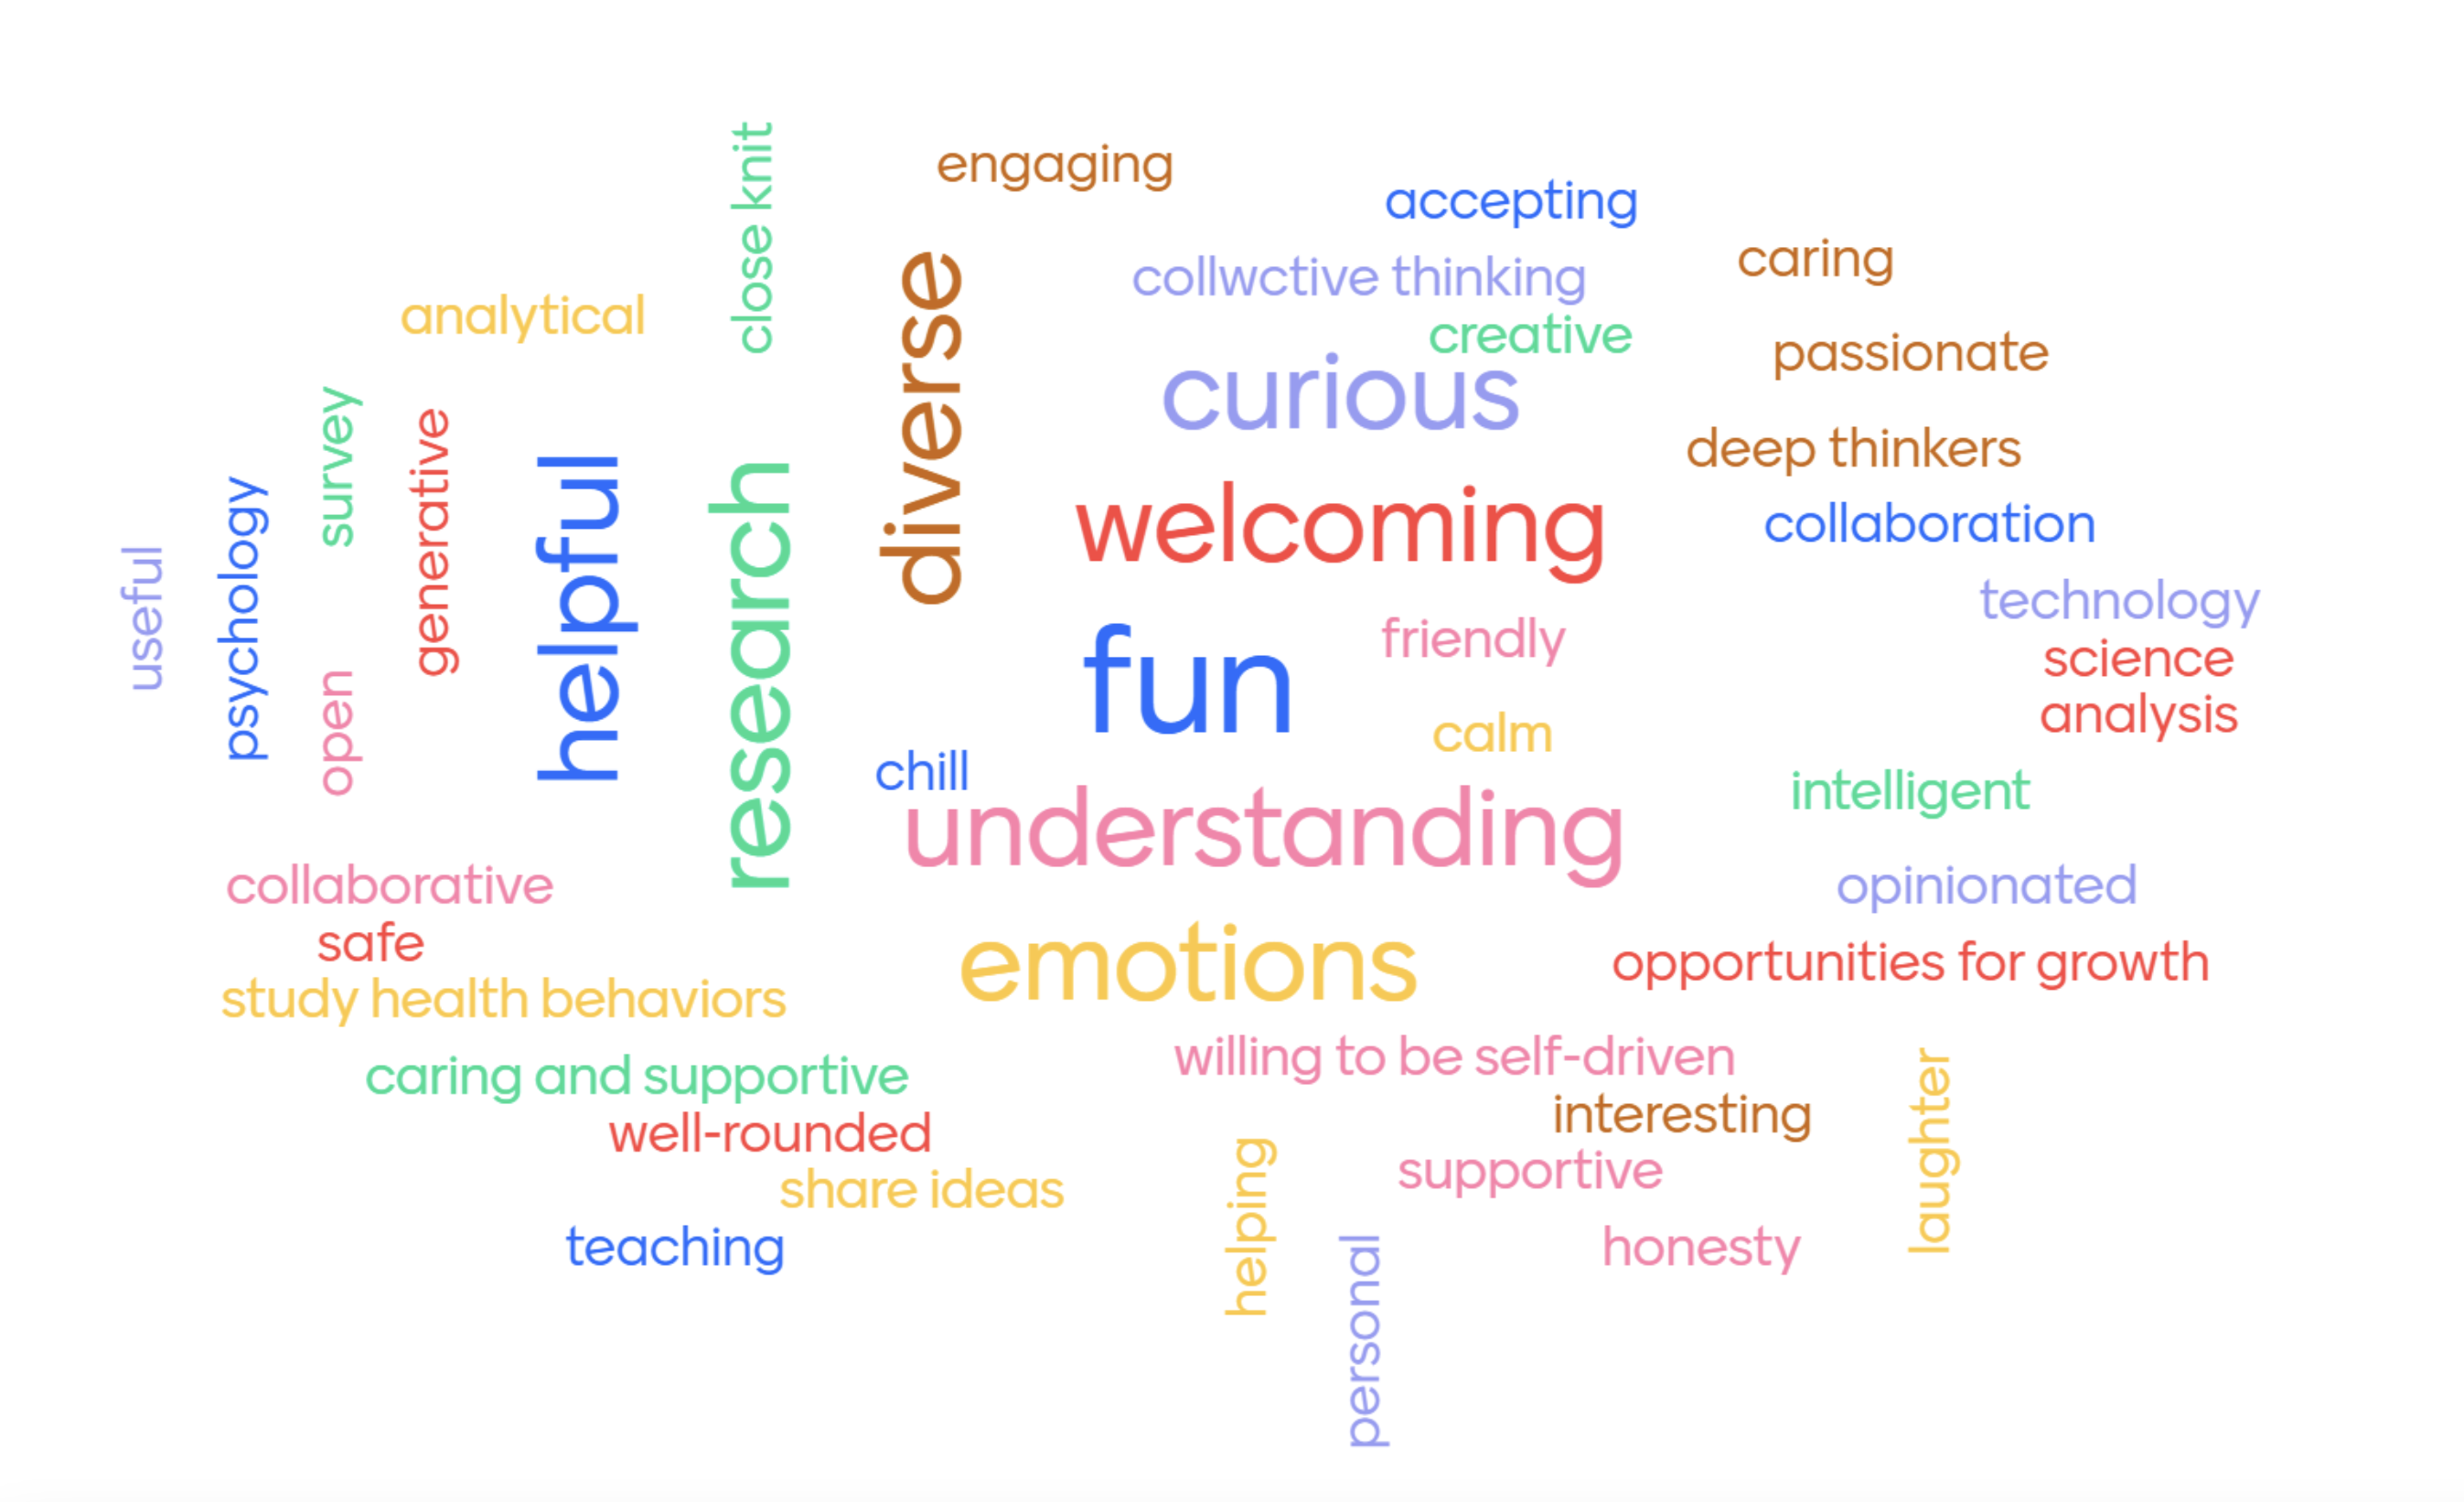 Word cloud of Research Assistant descriptions of the SPLAT Lab and its work.